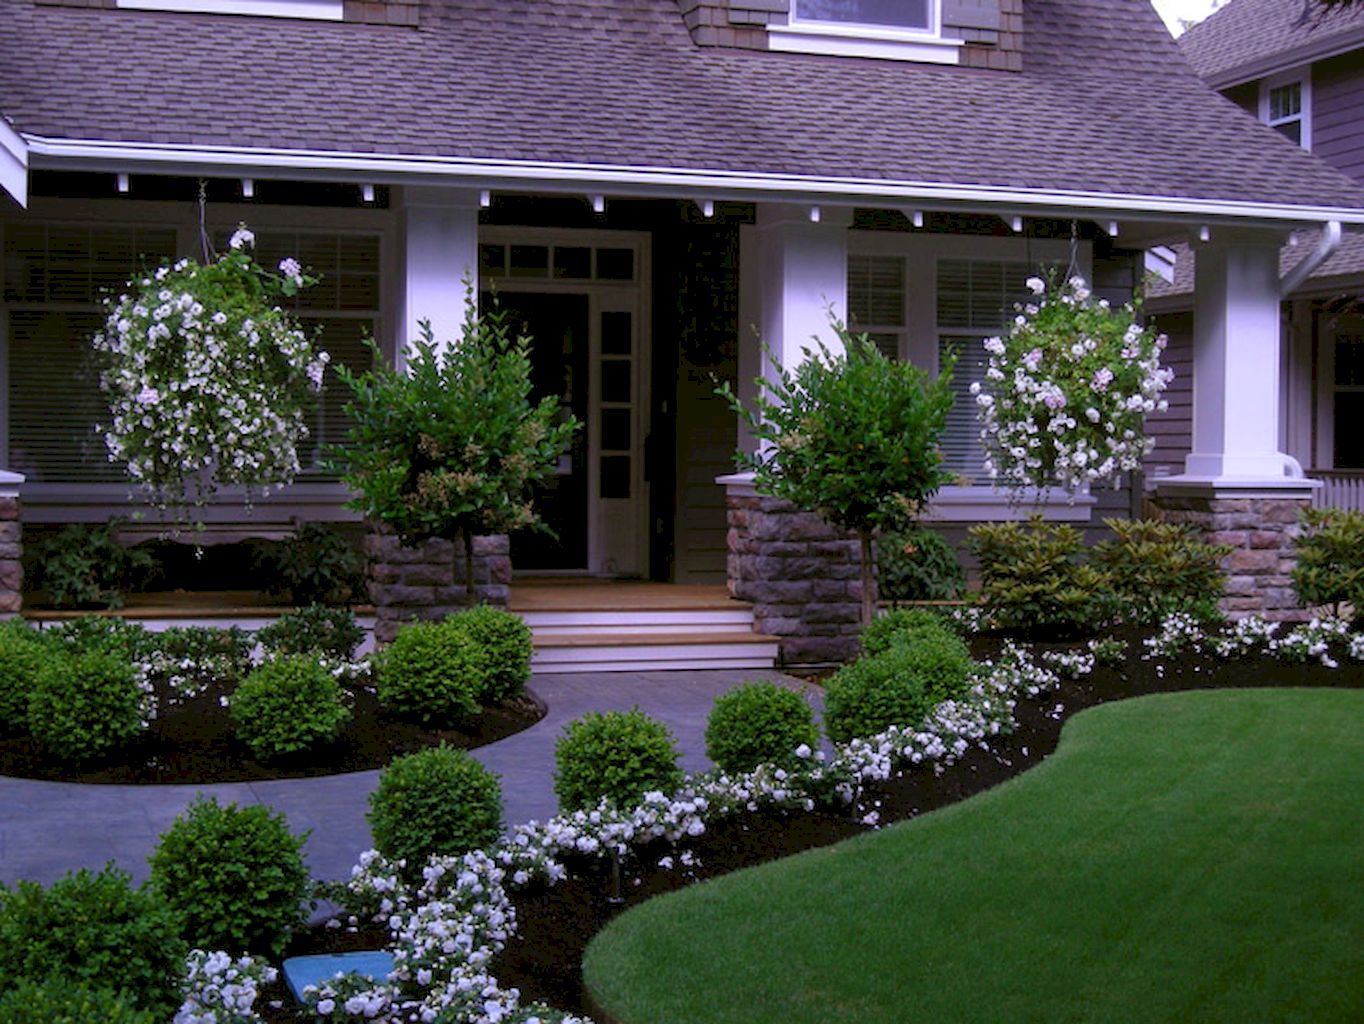 5 Ways Landscaping Can Improve the Value of Your Home